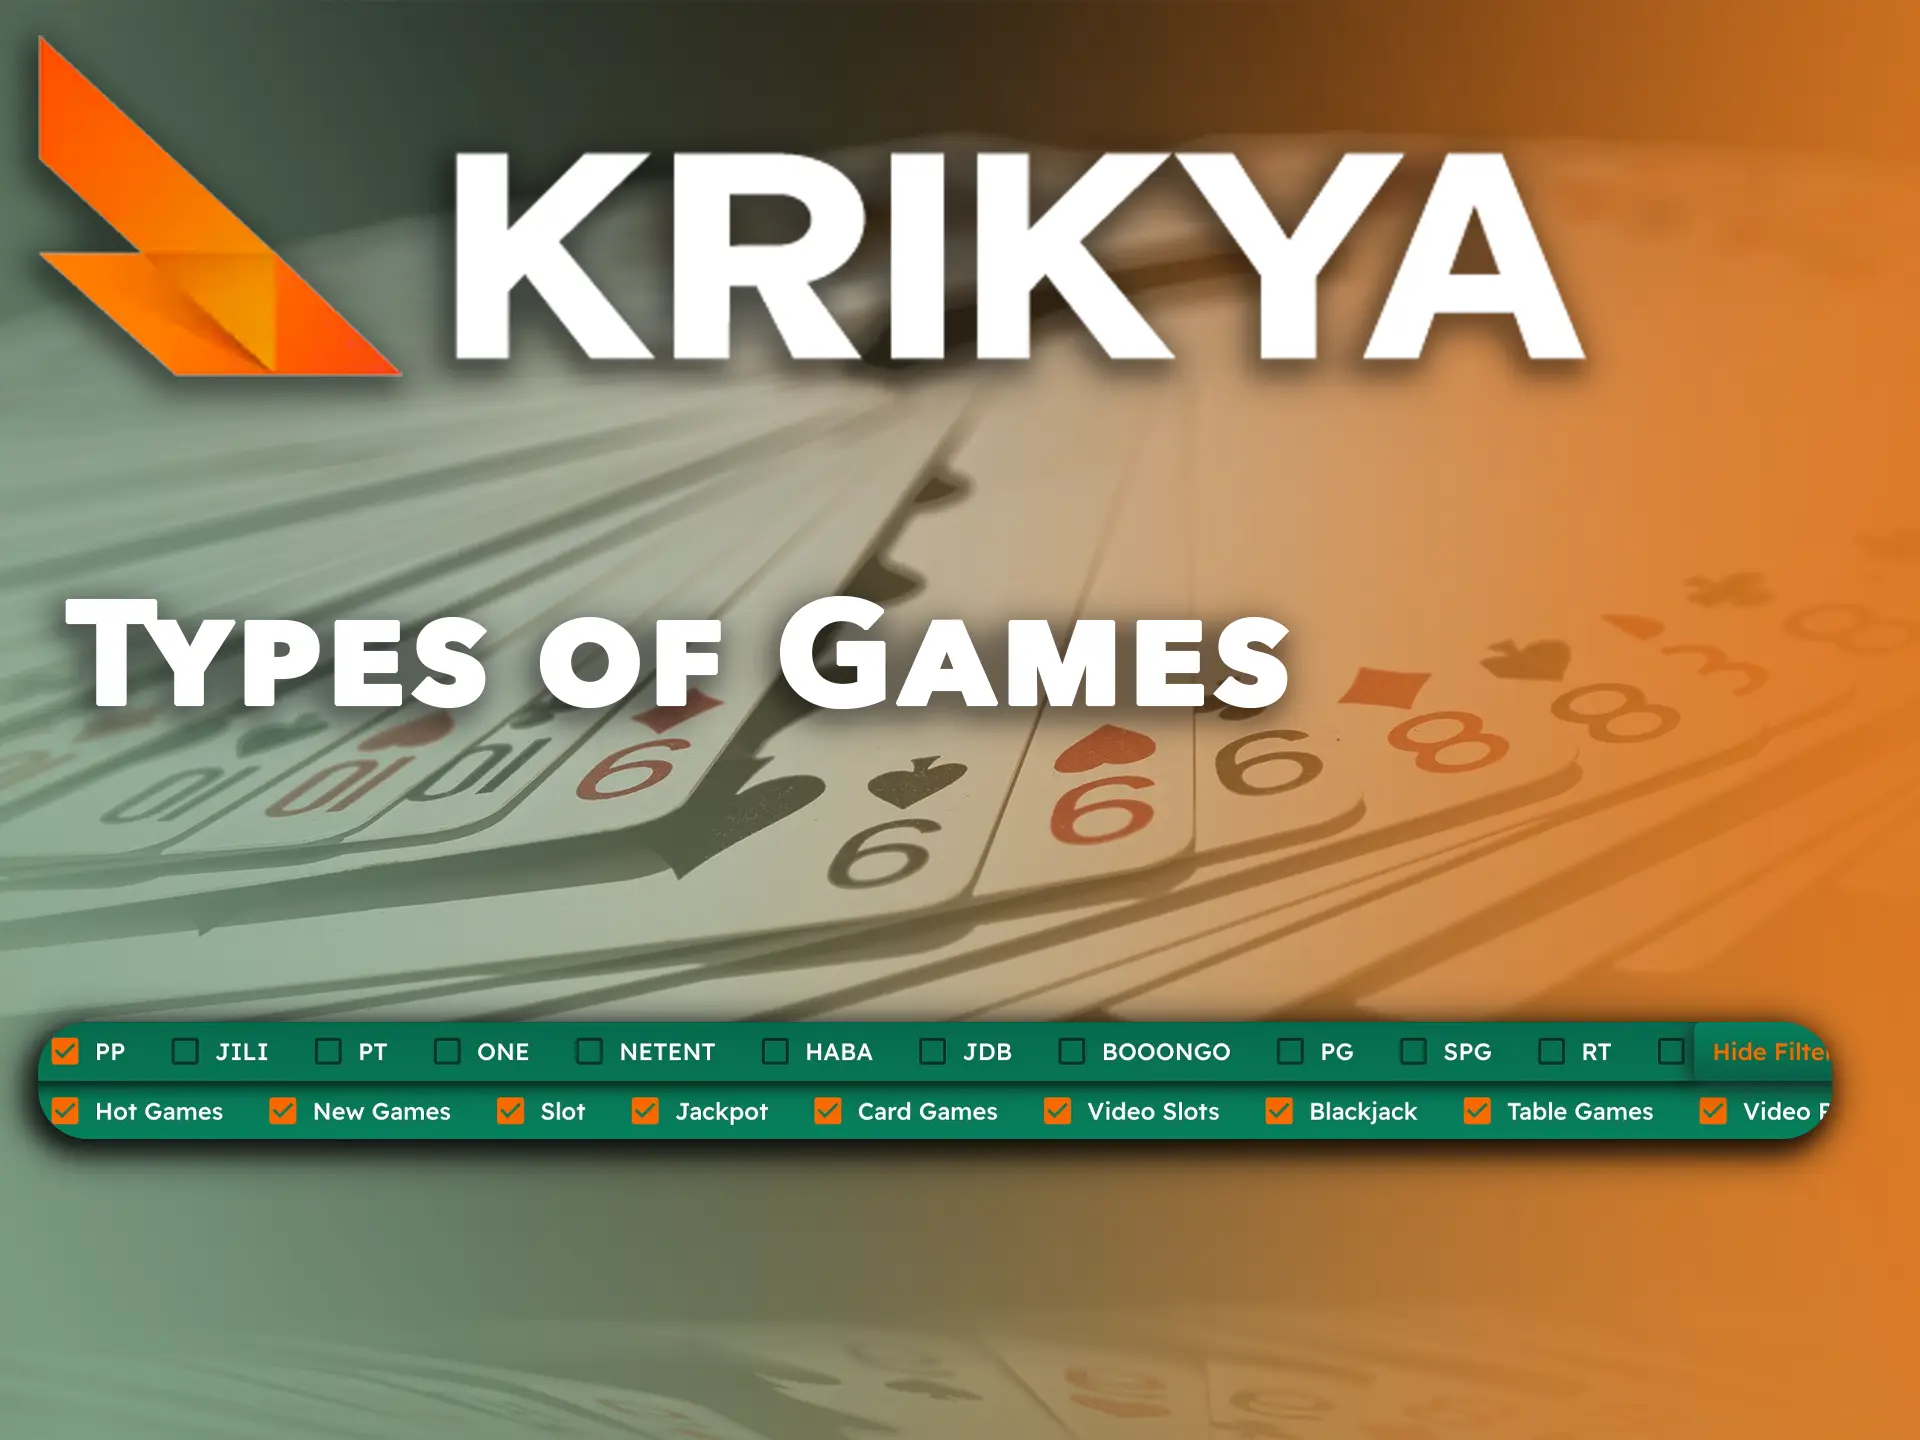 Krikya Casino gives players a variety of games on the site and app.